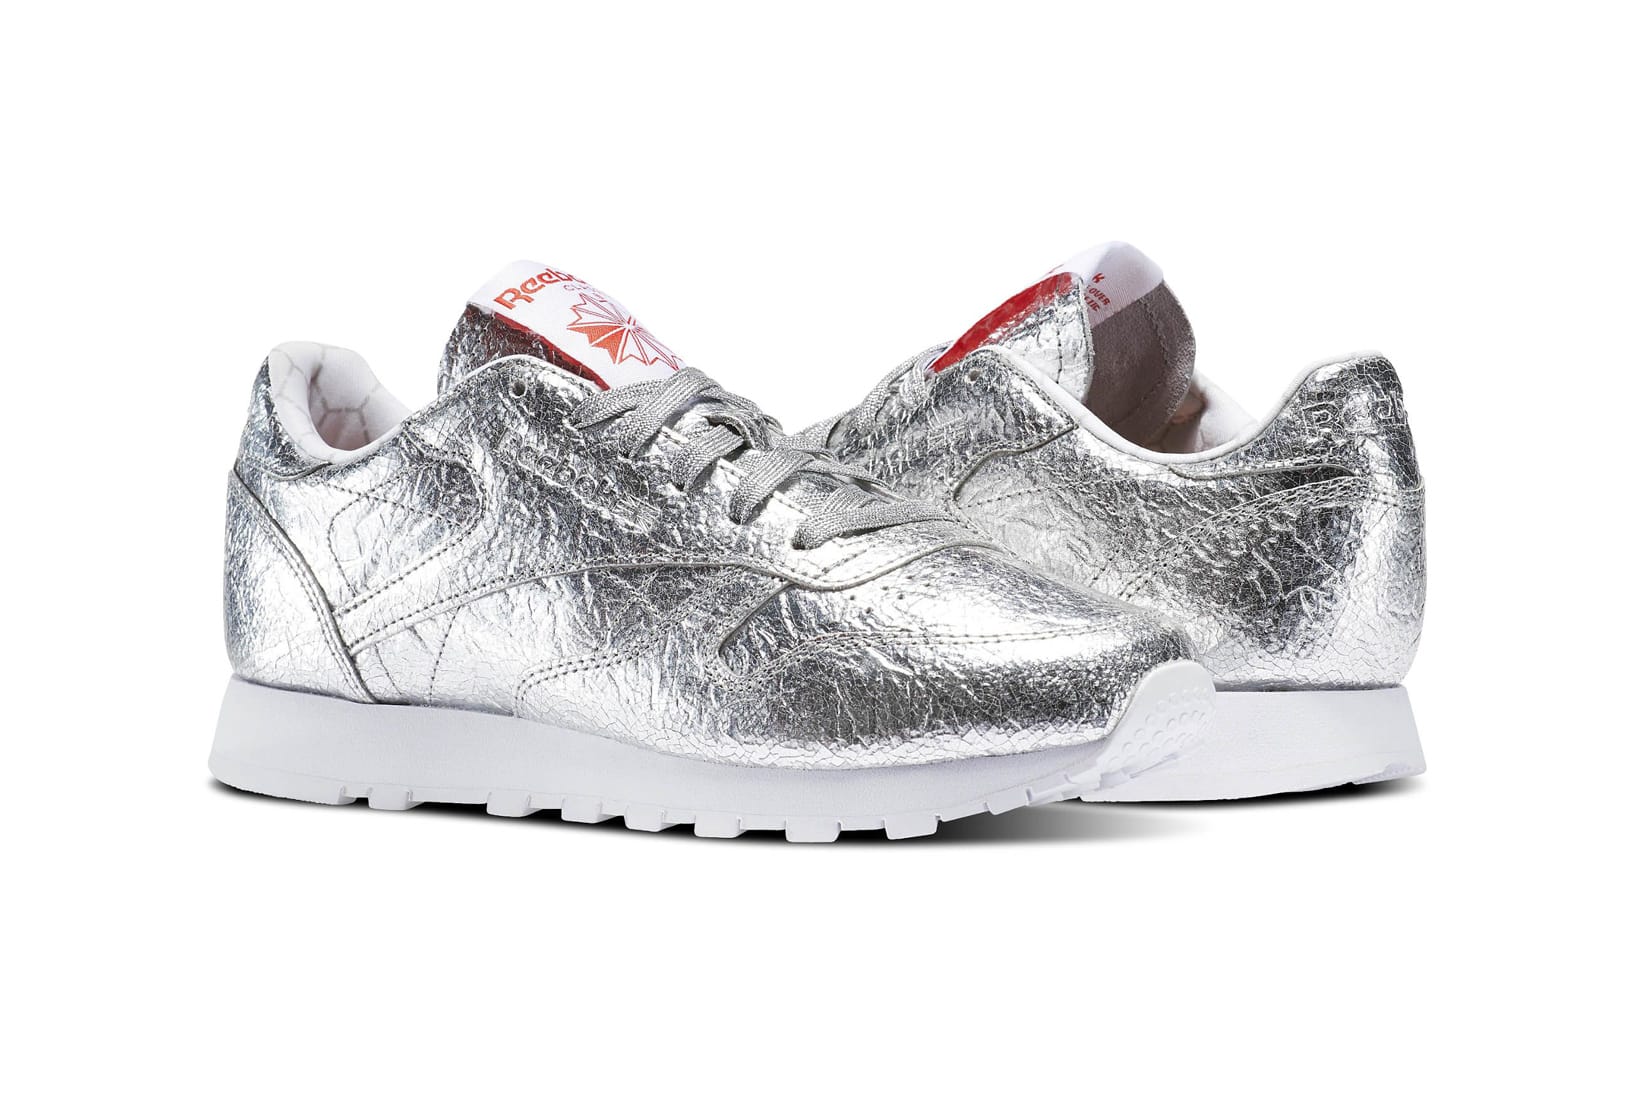 Reebok's Classic Leather Silver Met 